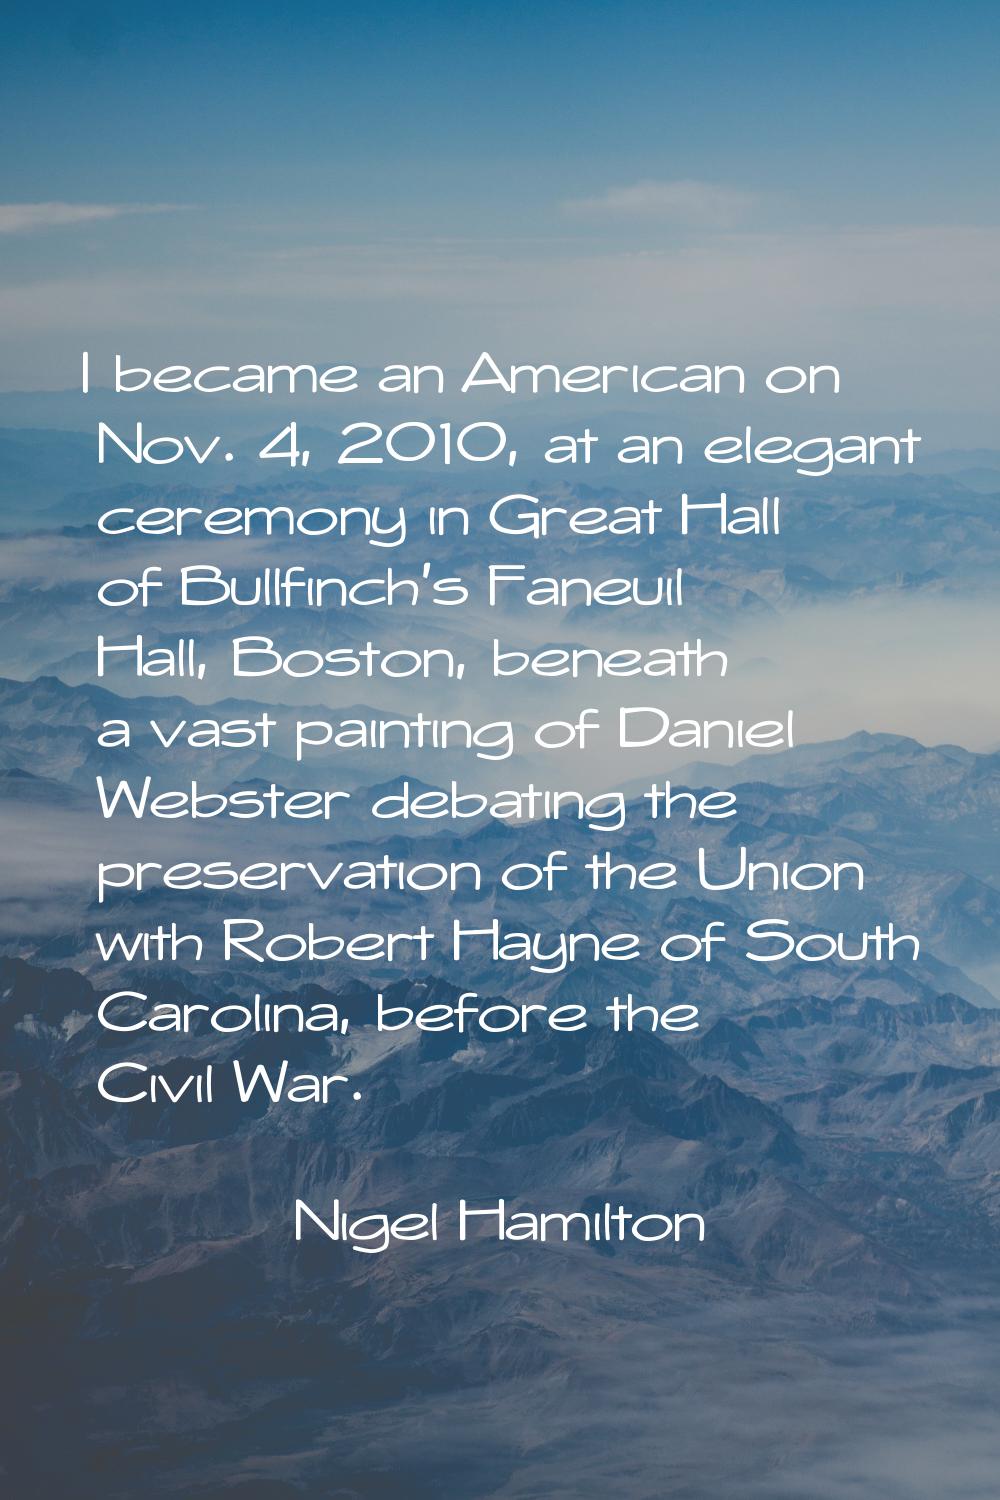 I became an American on Nov. 4, 2010, at an elegant ceremony in Great Hall of Bullfinch's Faneuil H